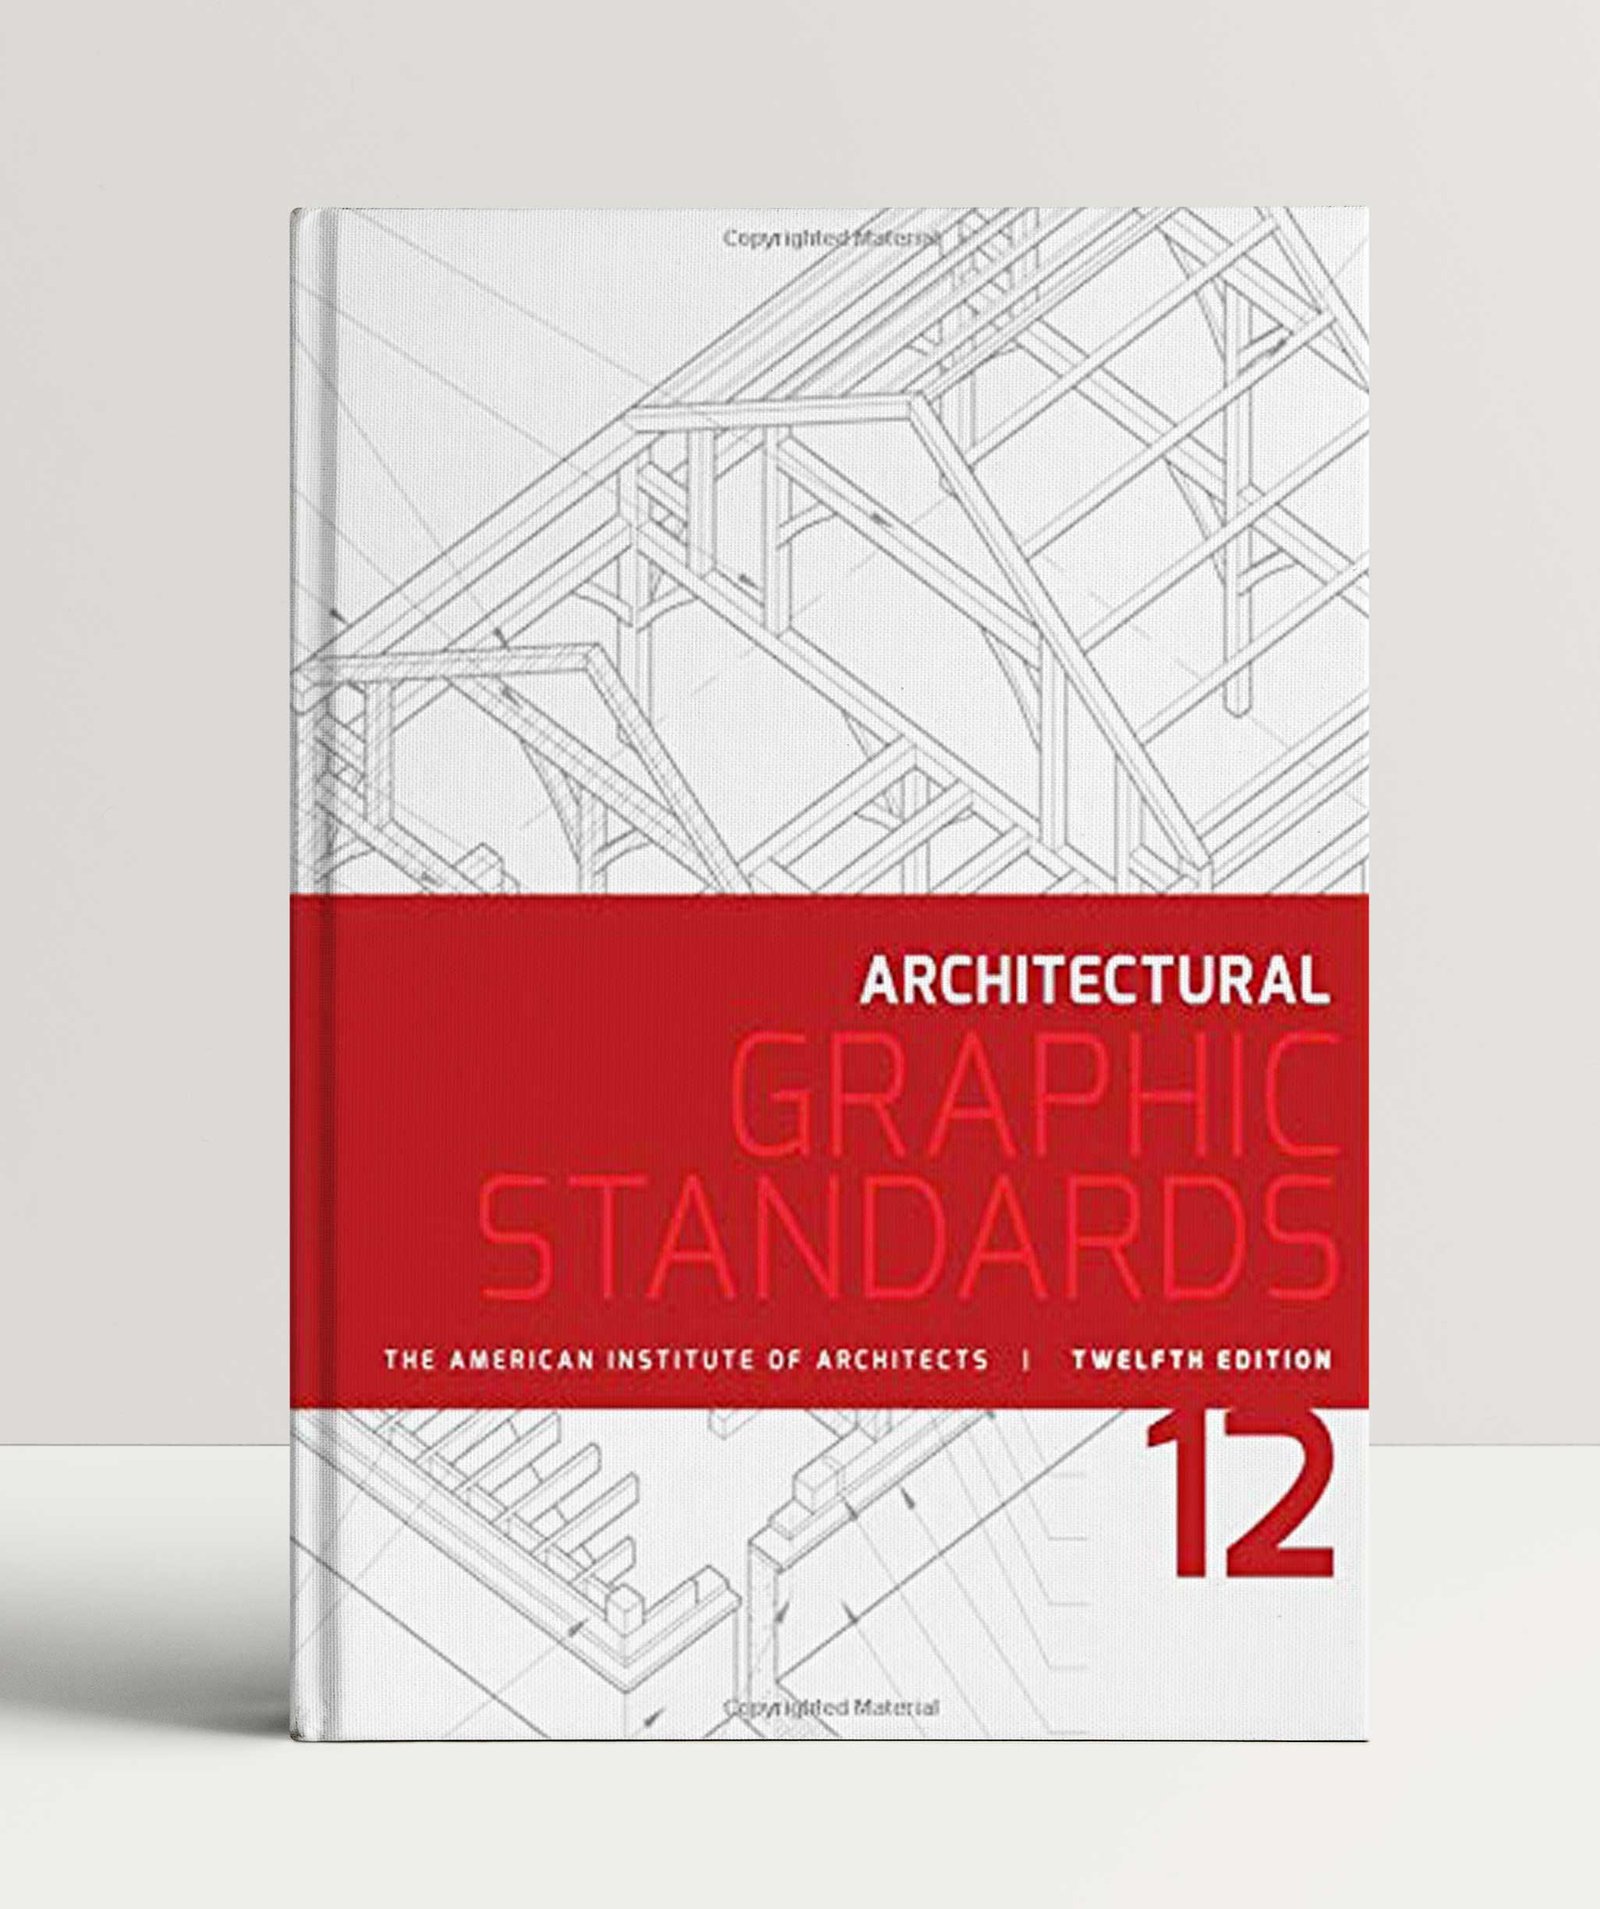 Architectural Graphic Standards  by American Institute of Architects, Dennis J. Hall, Nina M. Giglio 